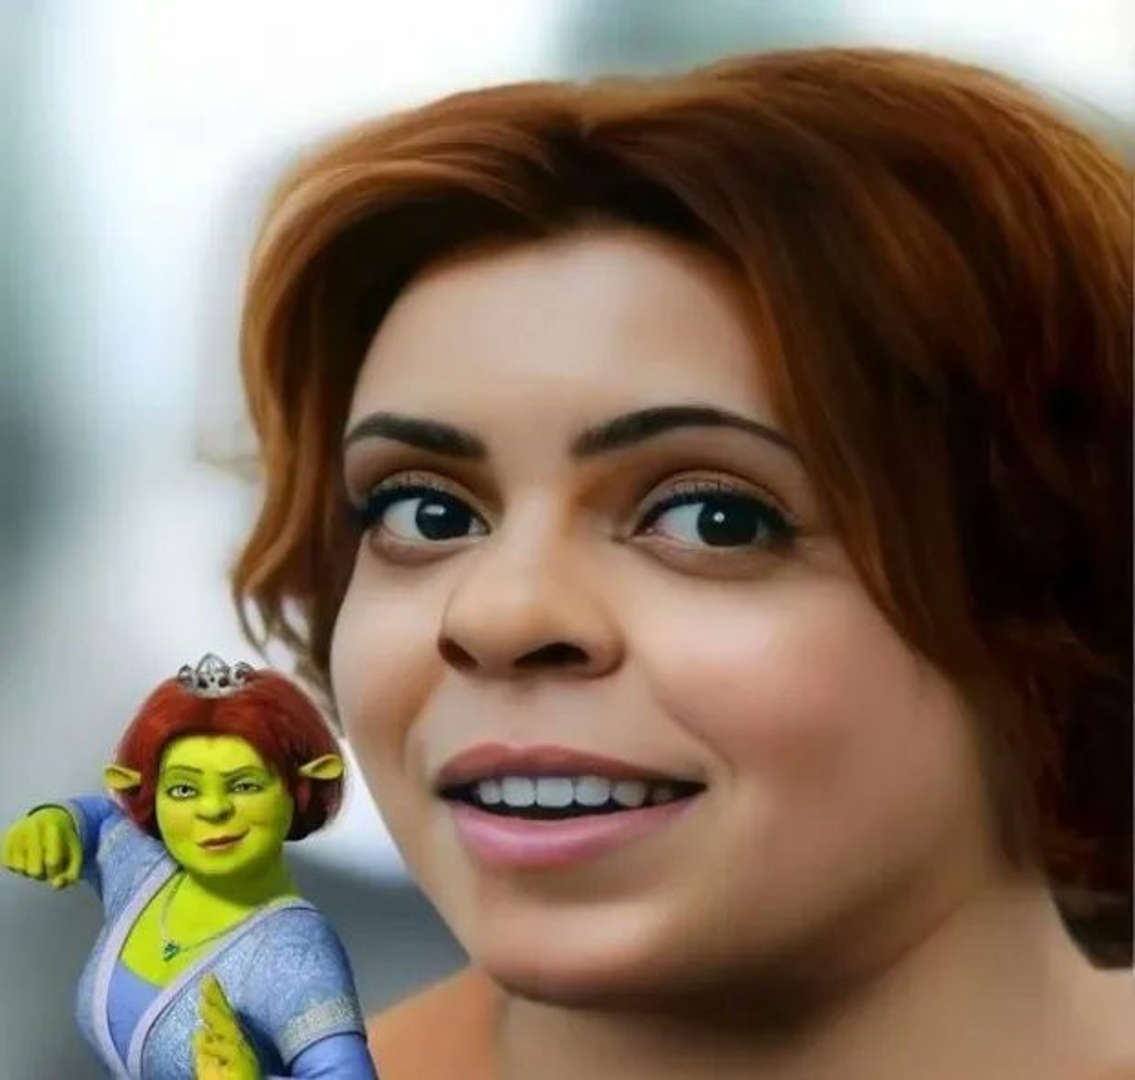 This is how Shrek characters would look like in real life according to the AI